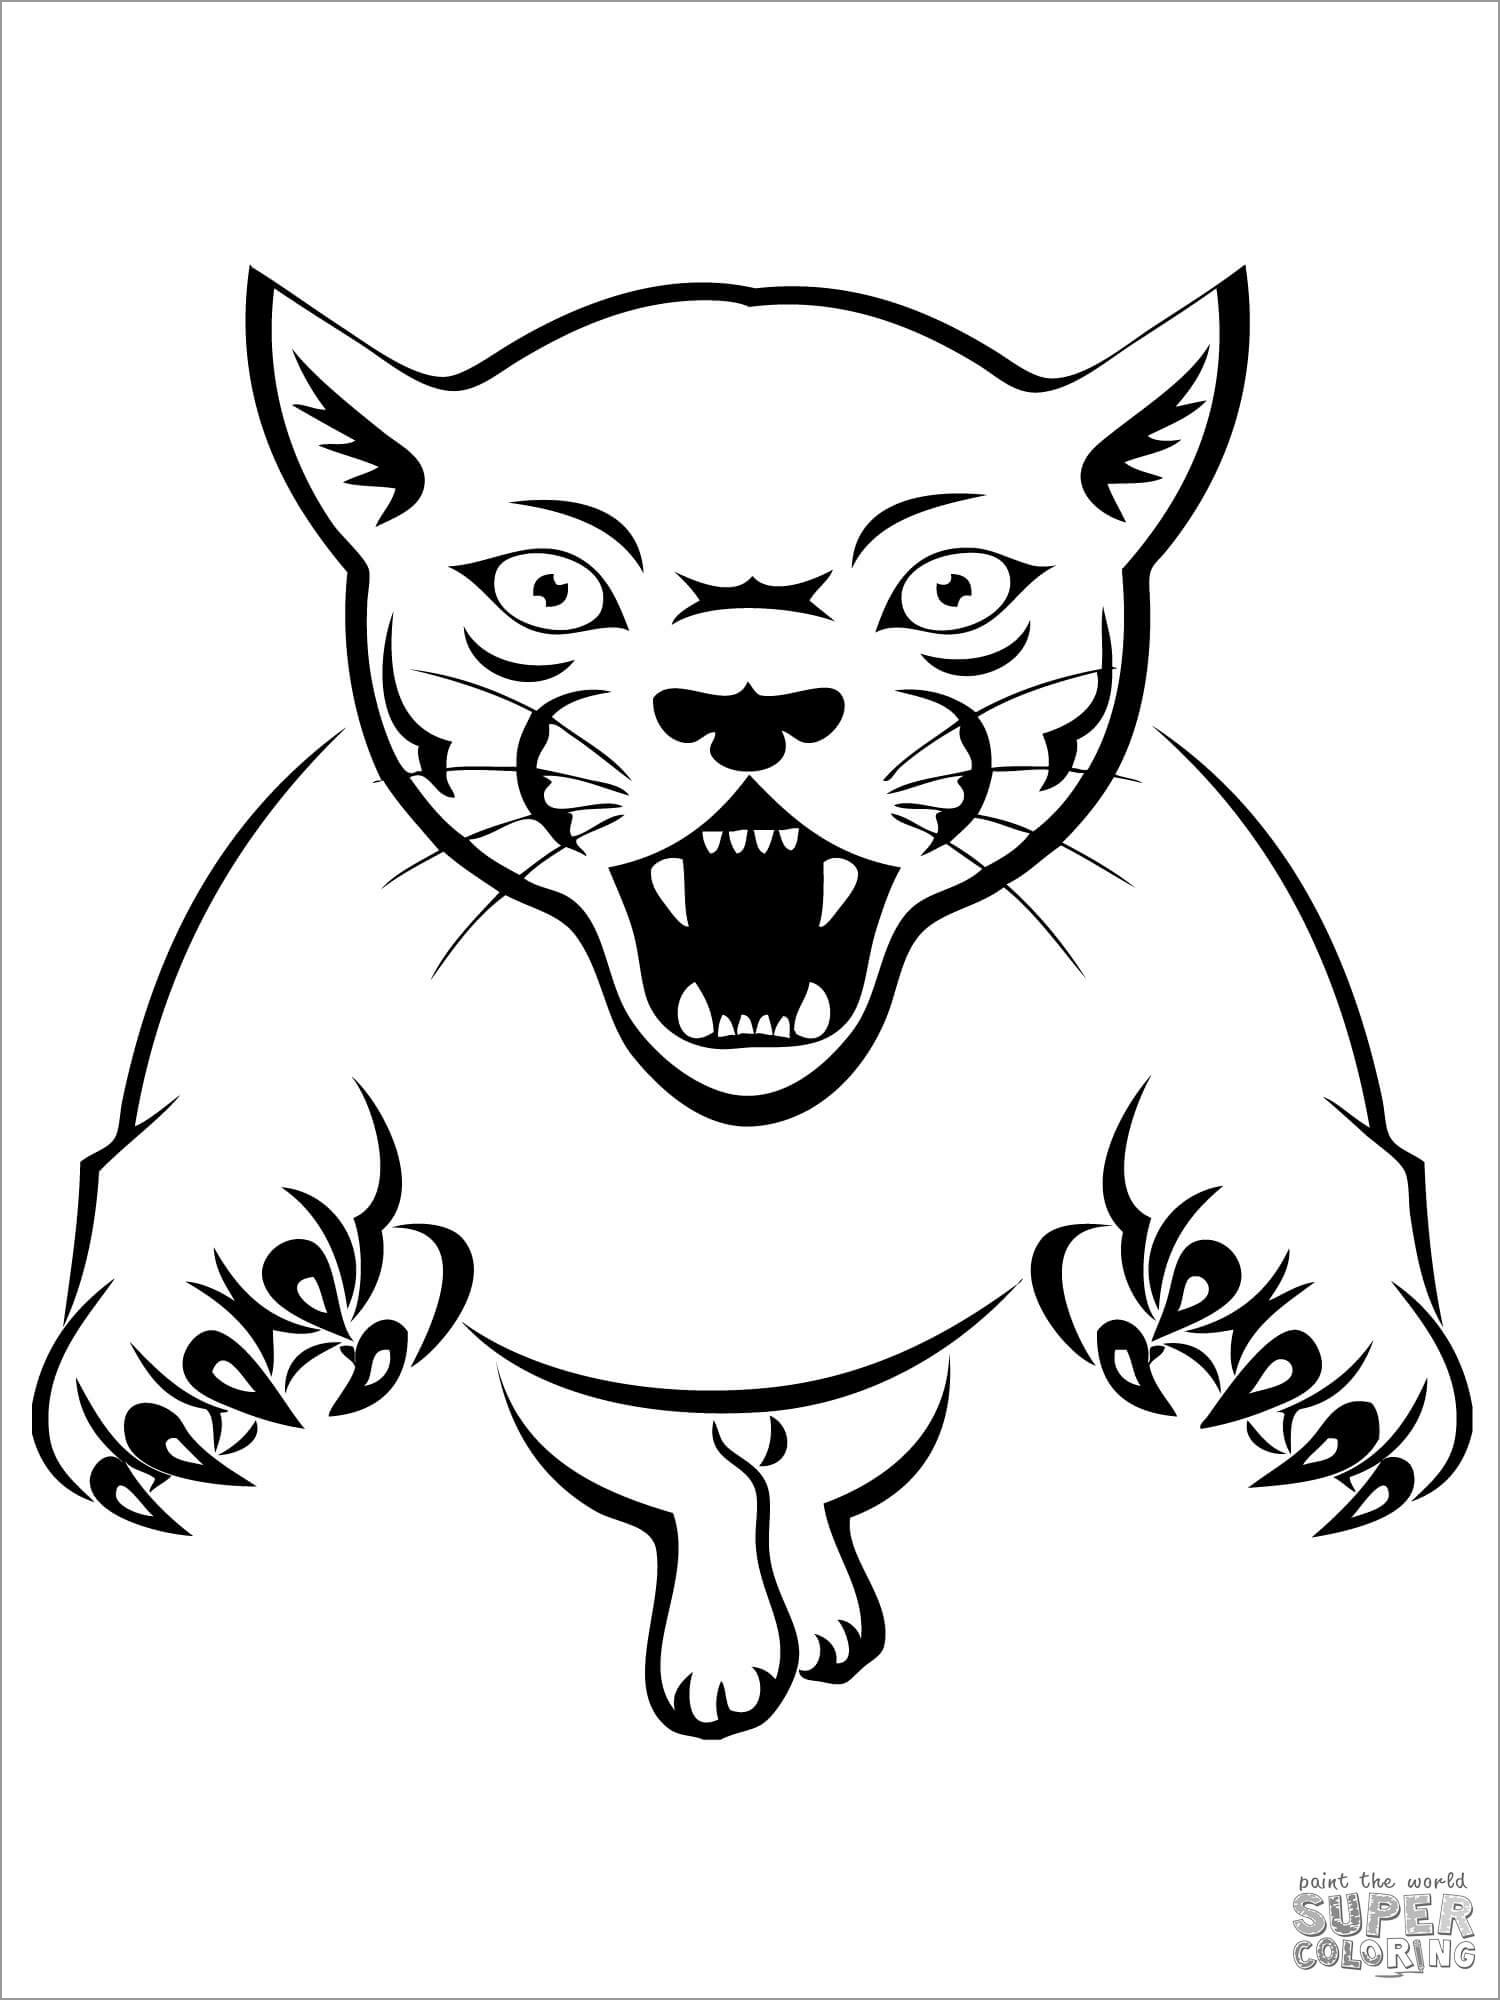 Panther Coloring Page to Print